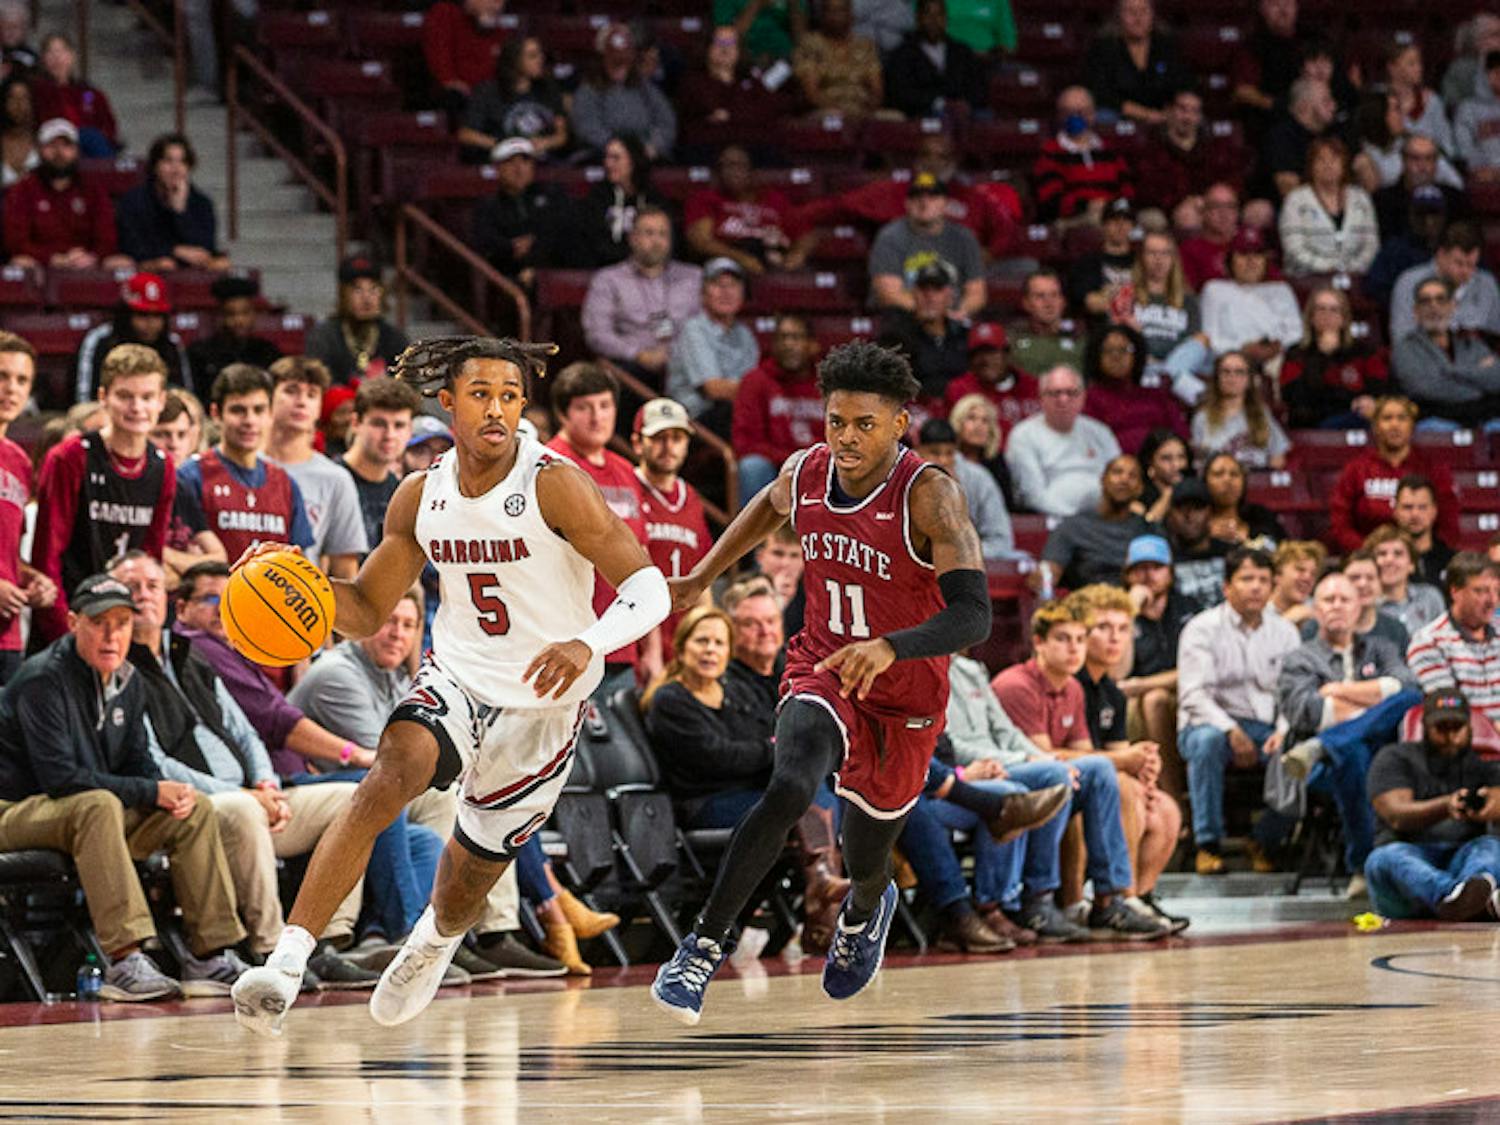 Junior guard Meechie Johnson explodes down the court and past S.C. State players during a breakaway. The Gamecocks defeated the Bulldogs 80-77 in their season opener on Nov. 8, 2022.